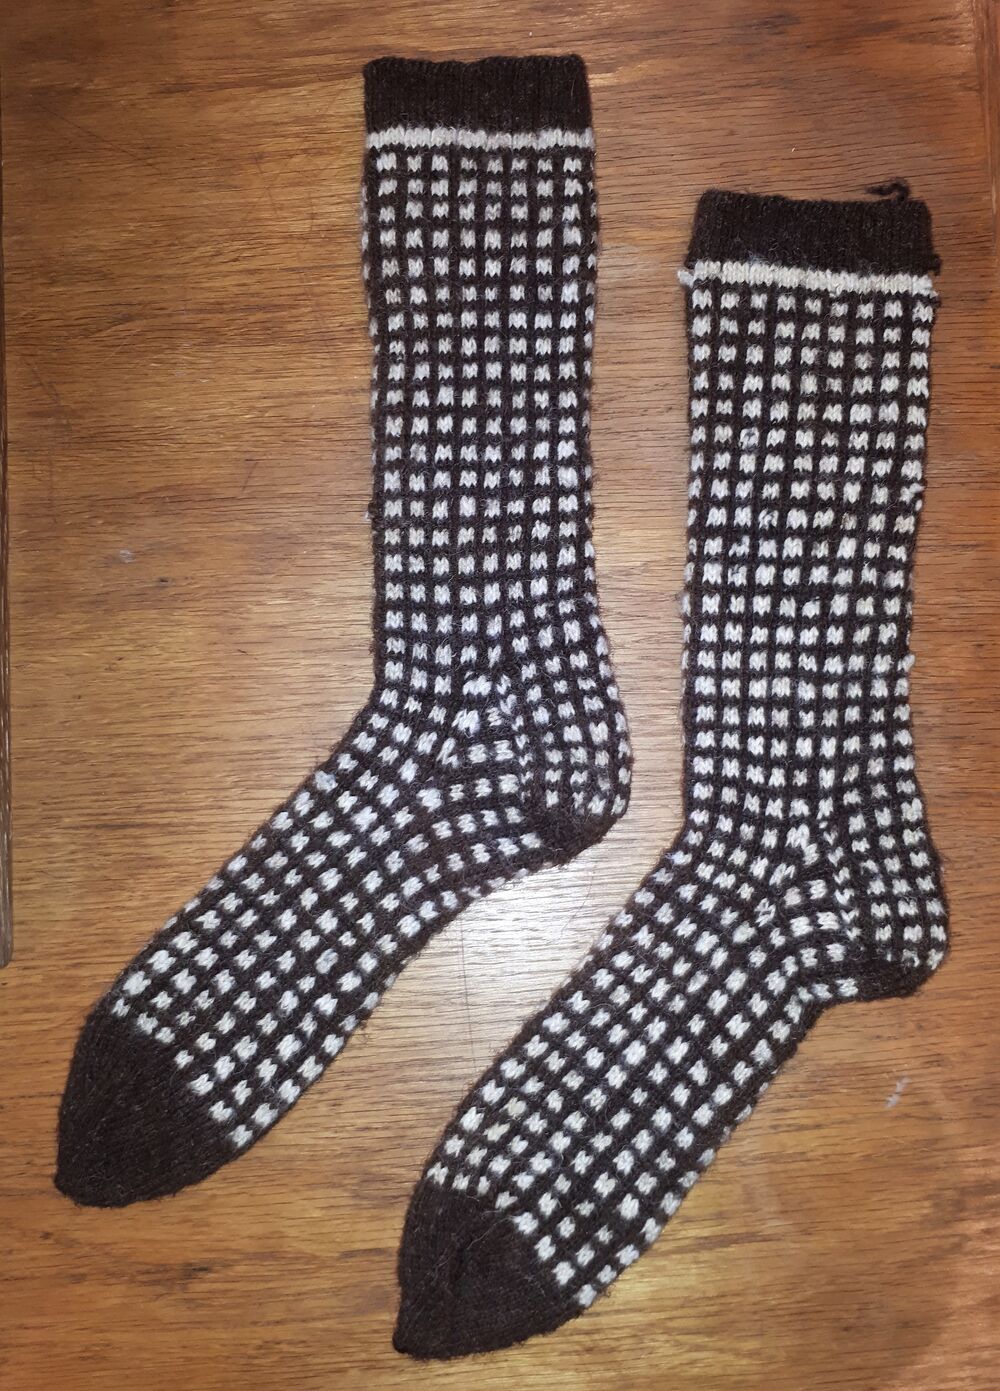 These socks were made on St Kilda from the wool of native sheep